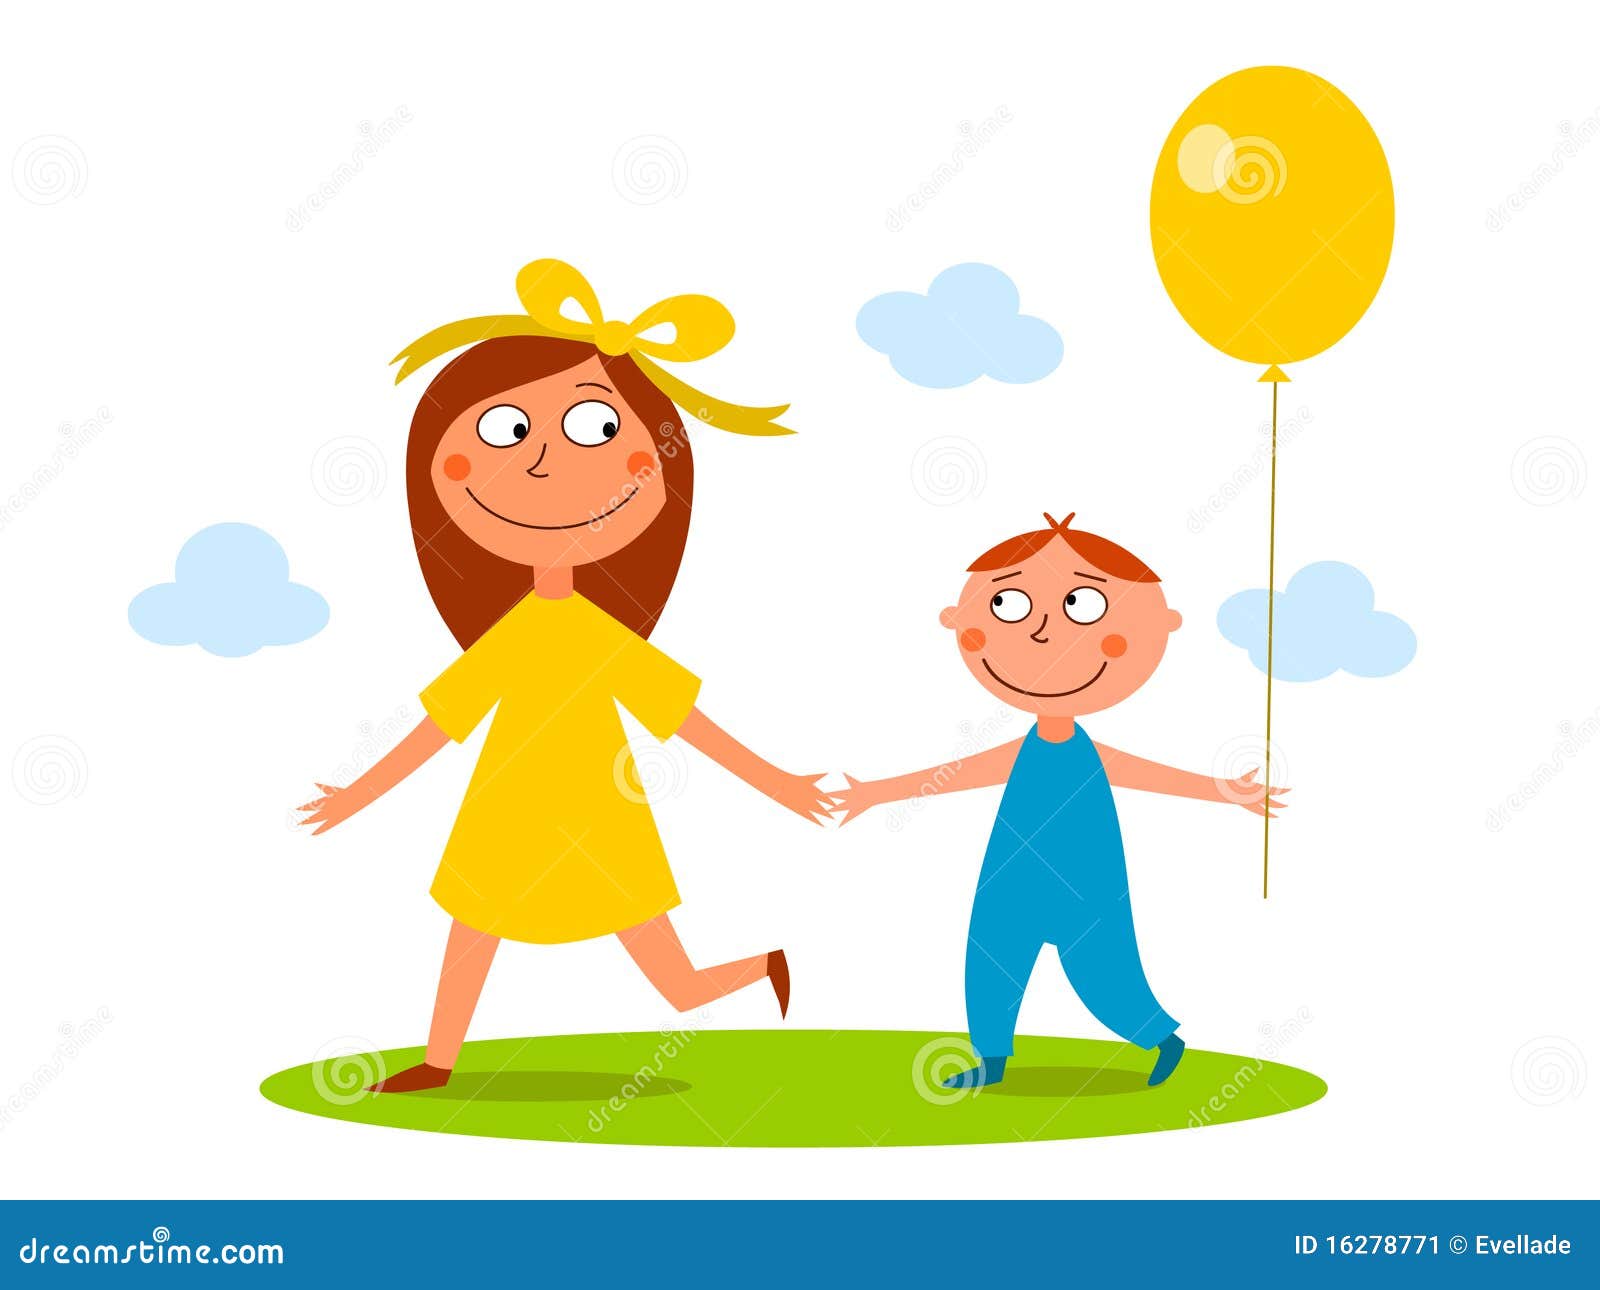 clipart of brother and sister - photo #44